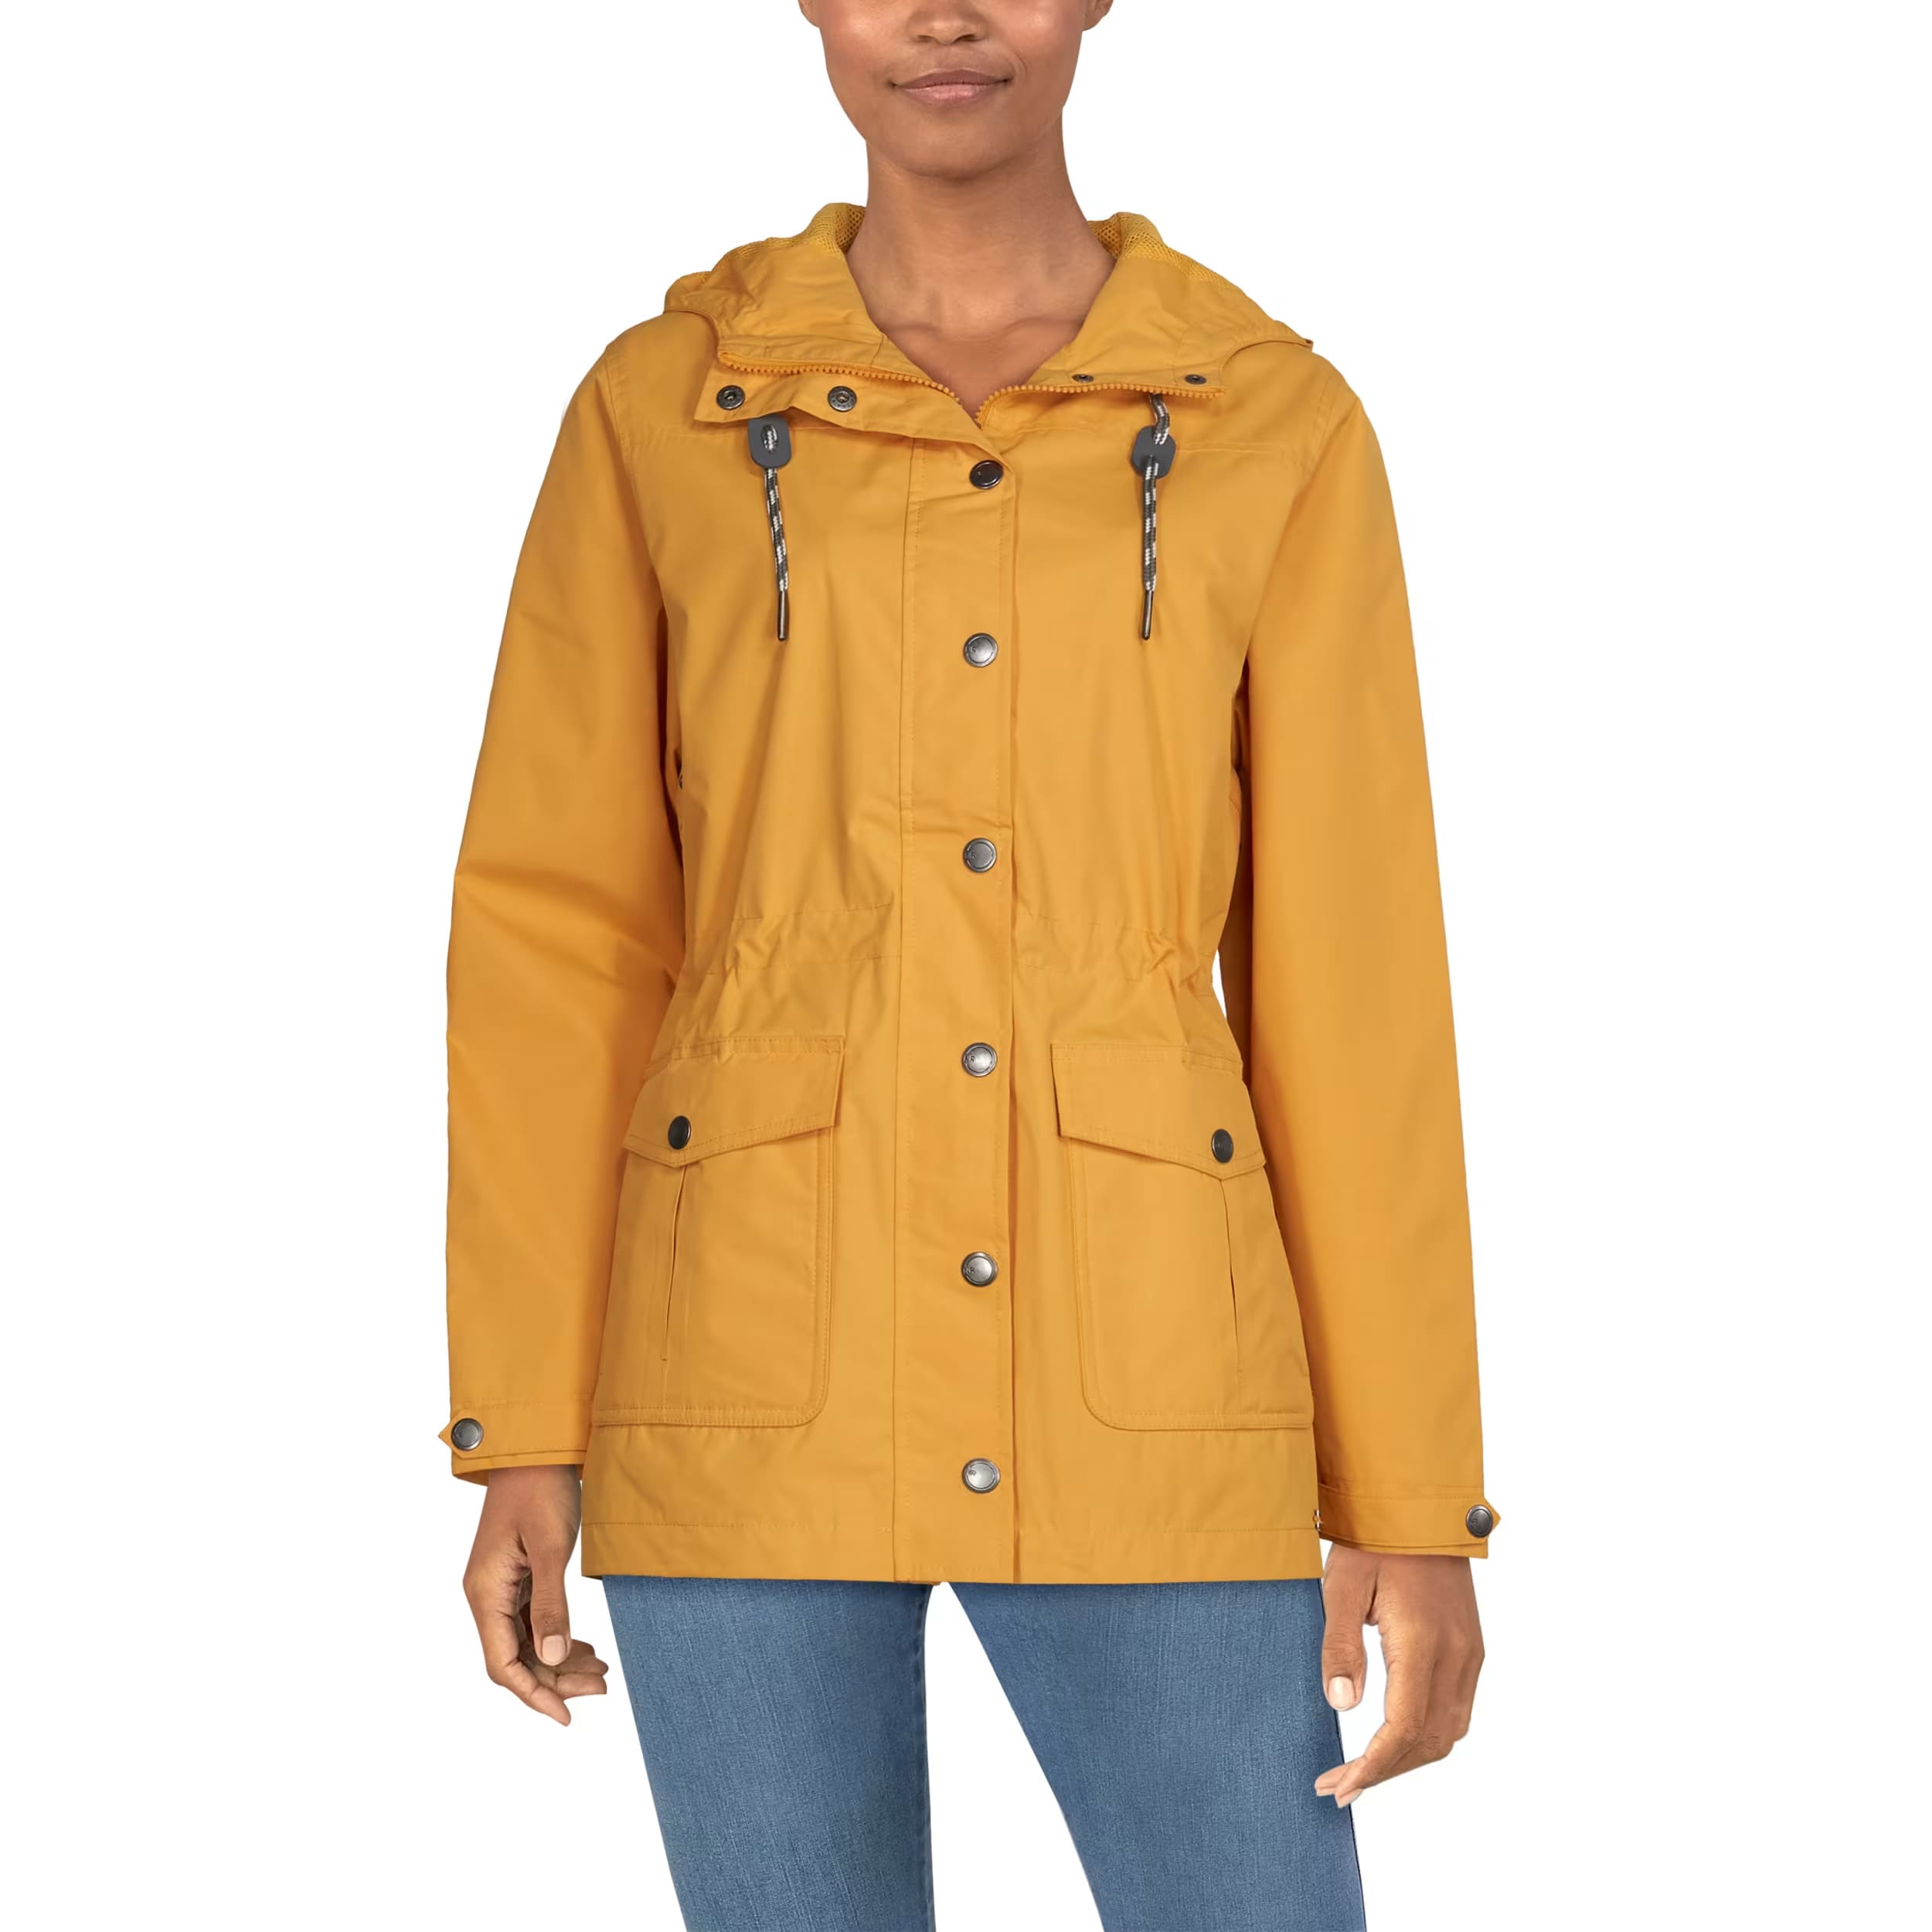 Natural Reflections® Women’s Essential Jacket